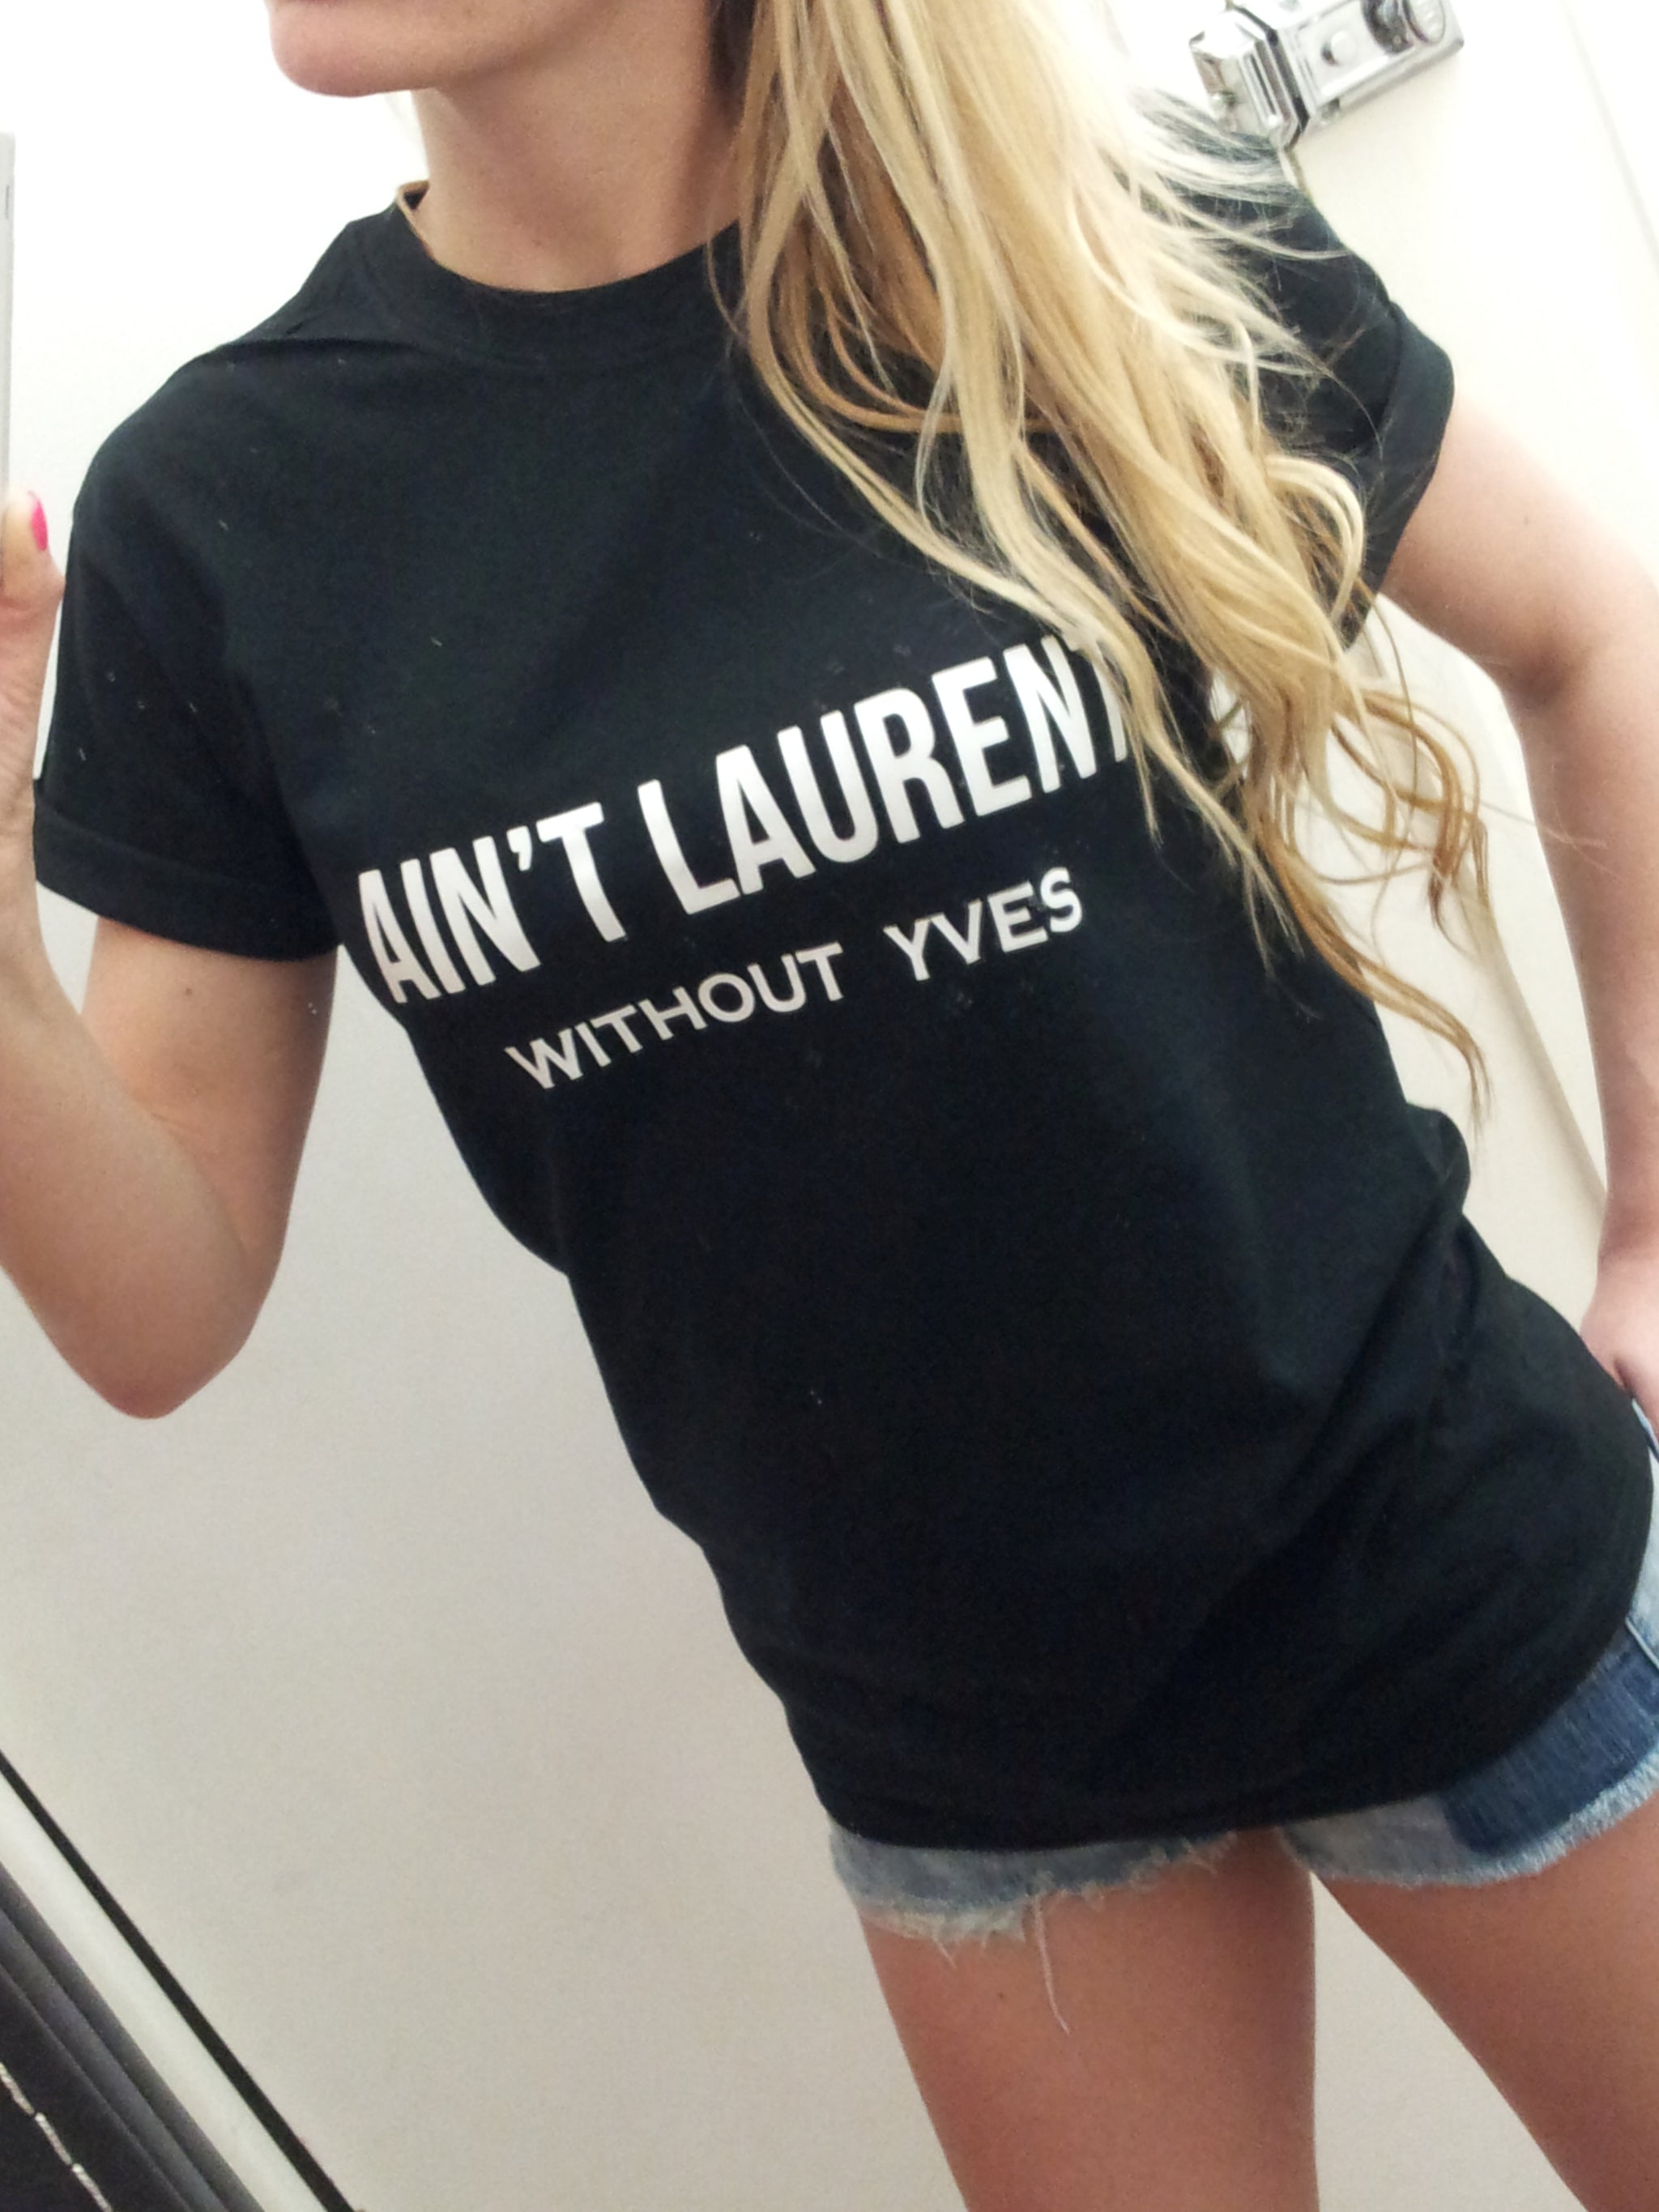 Ain't Laurent without Yves T-shirt - Urbantshirts.co.uk